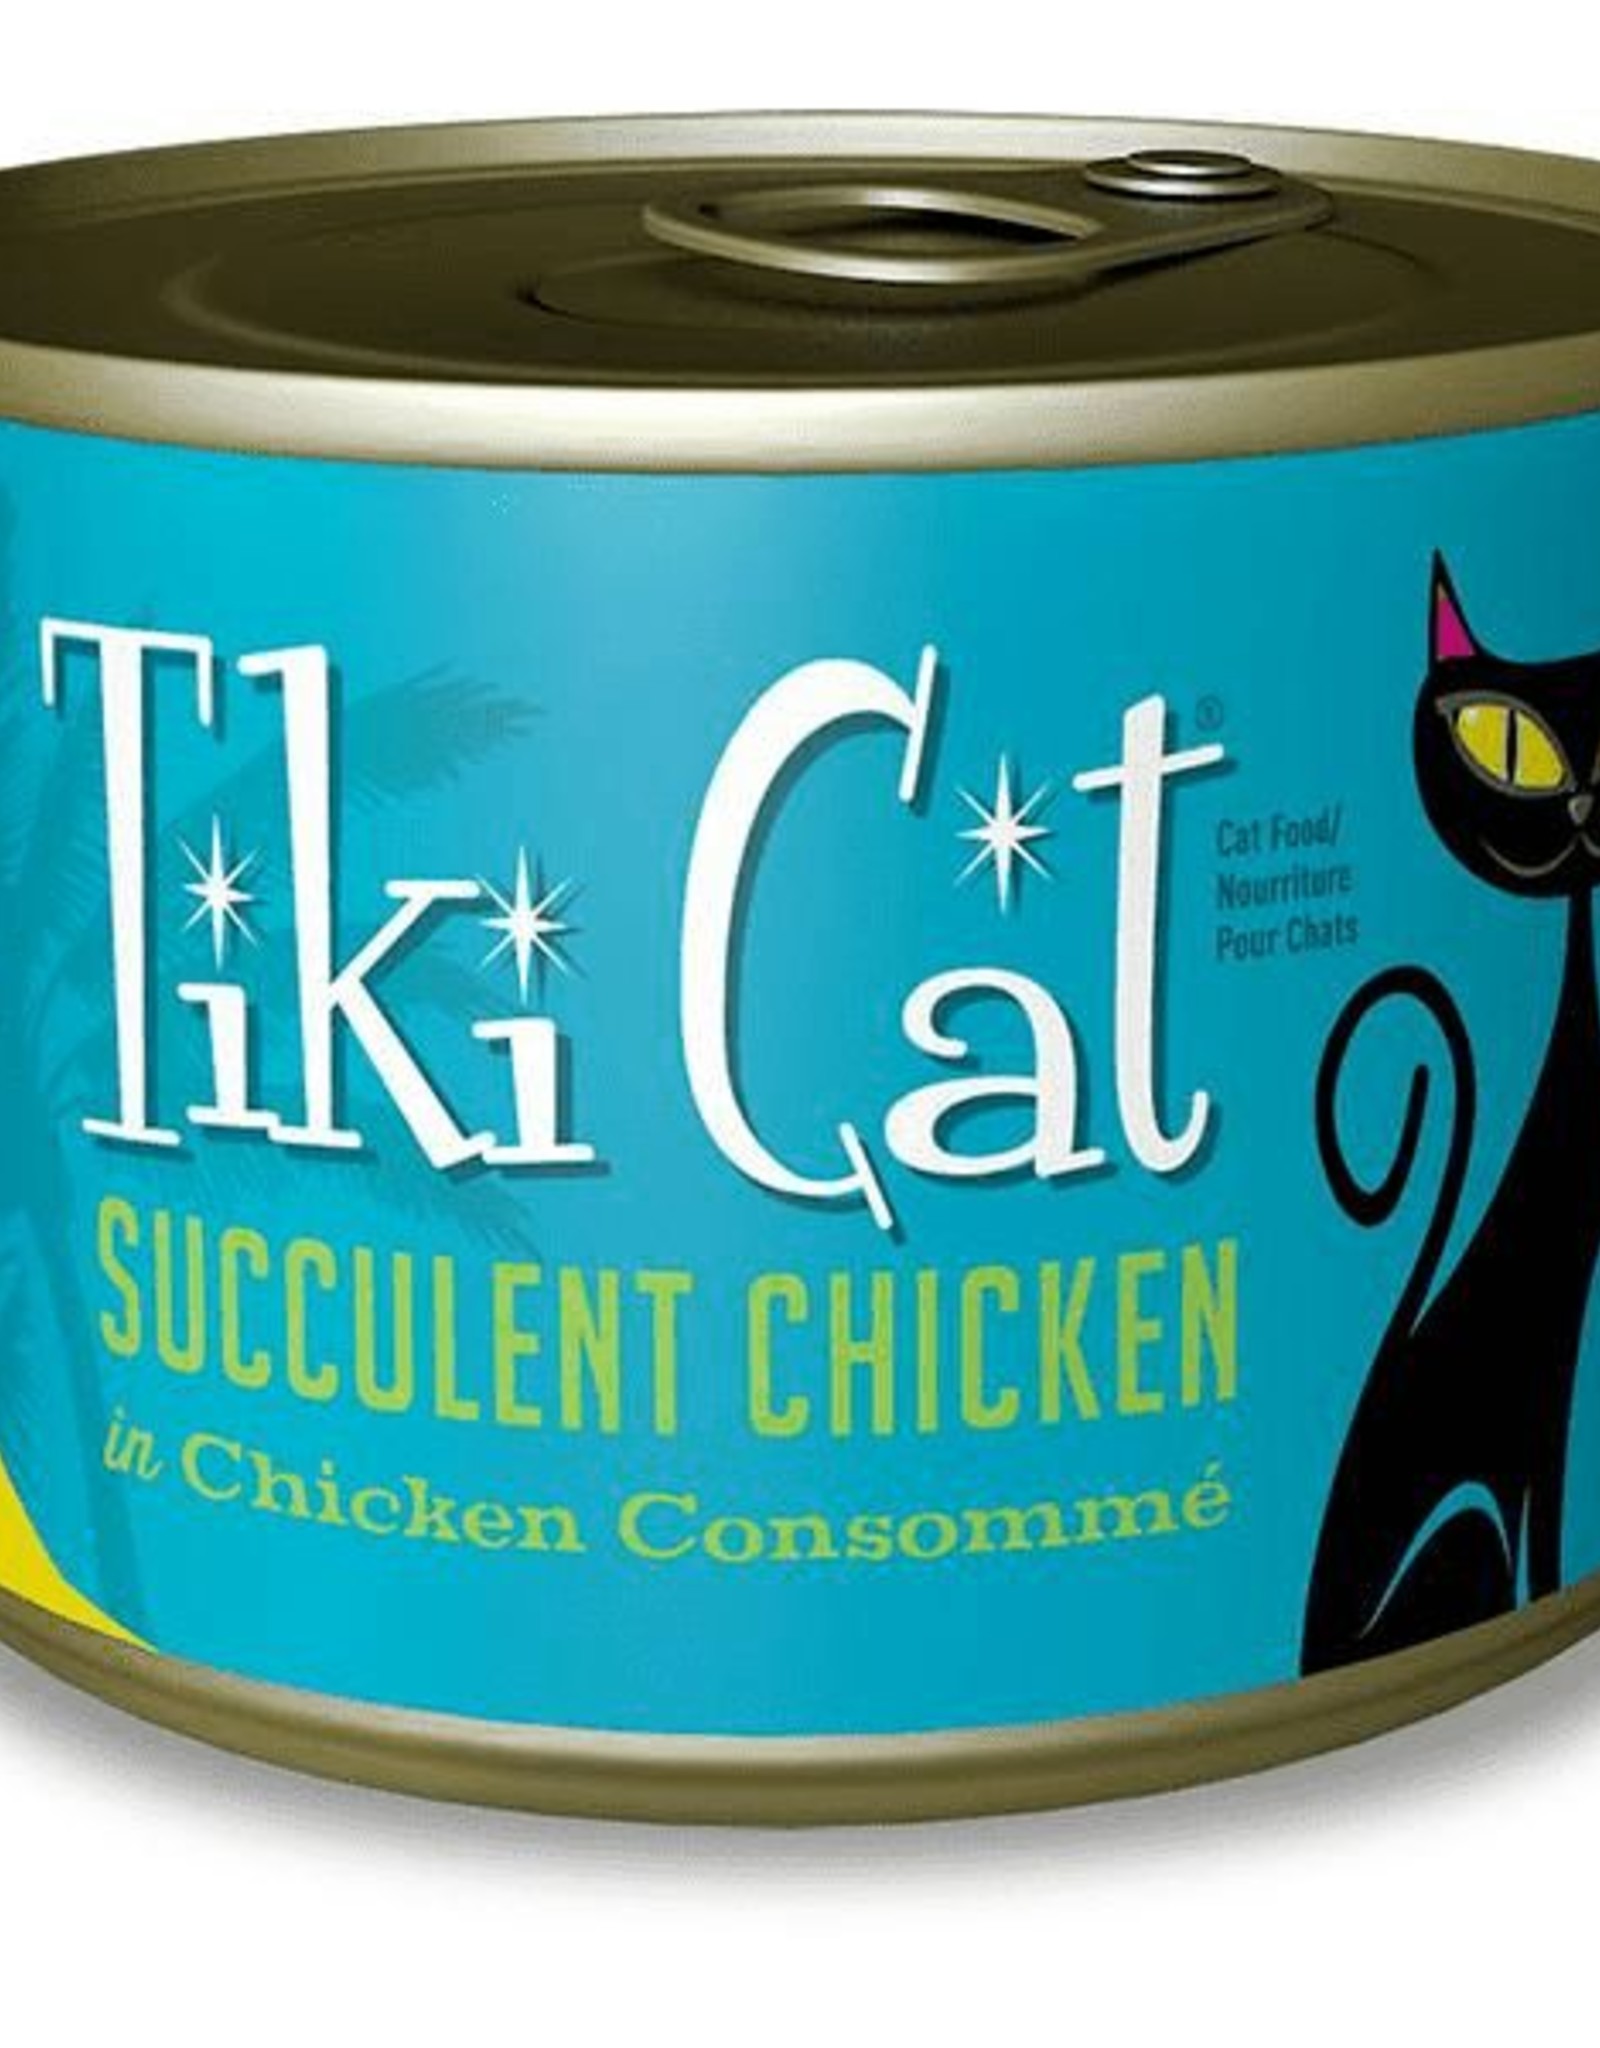 Tiki Cat Tiki Cat Puka Puka Luau Succulent Chicken in Chicken Consomme Cat Canned Food 6 oz